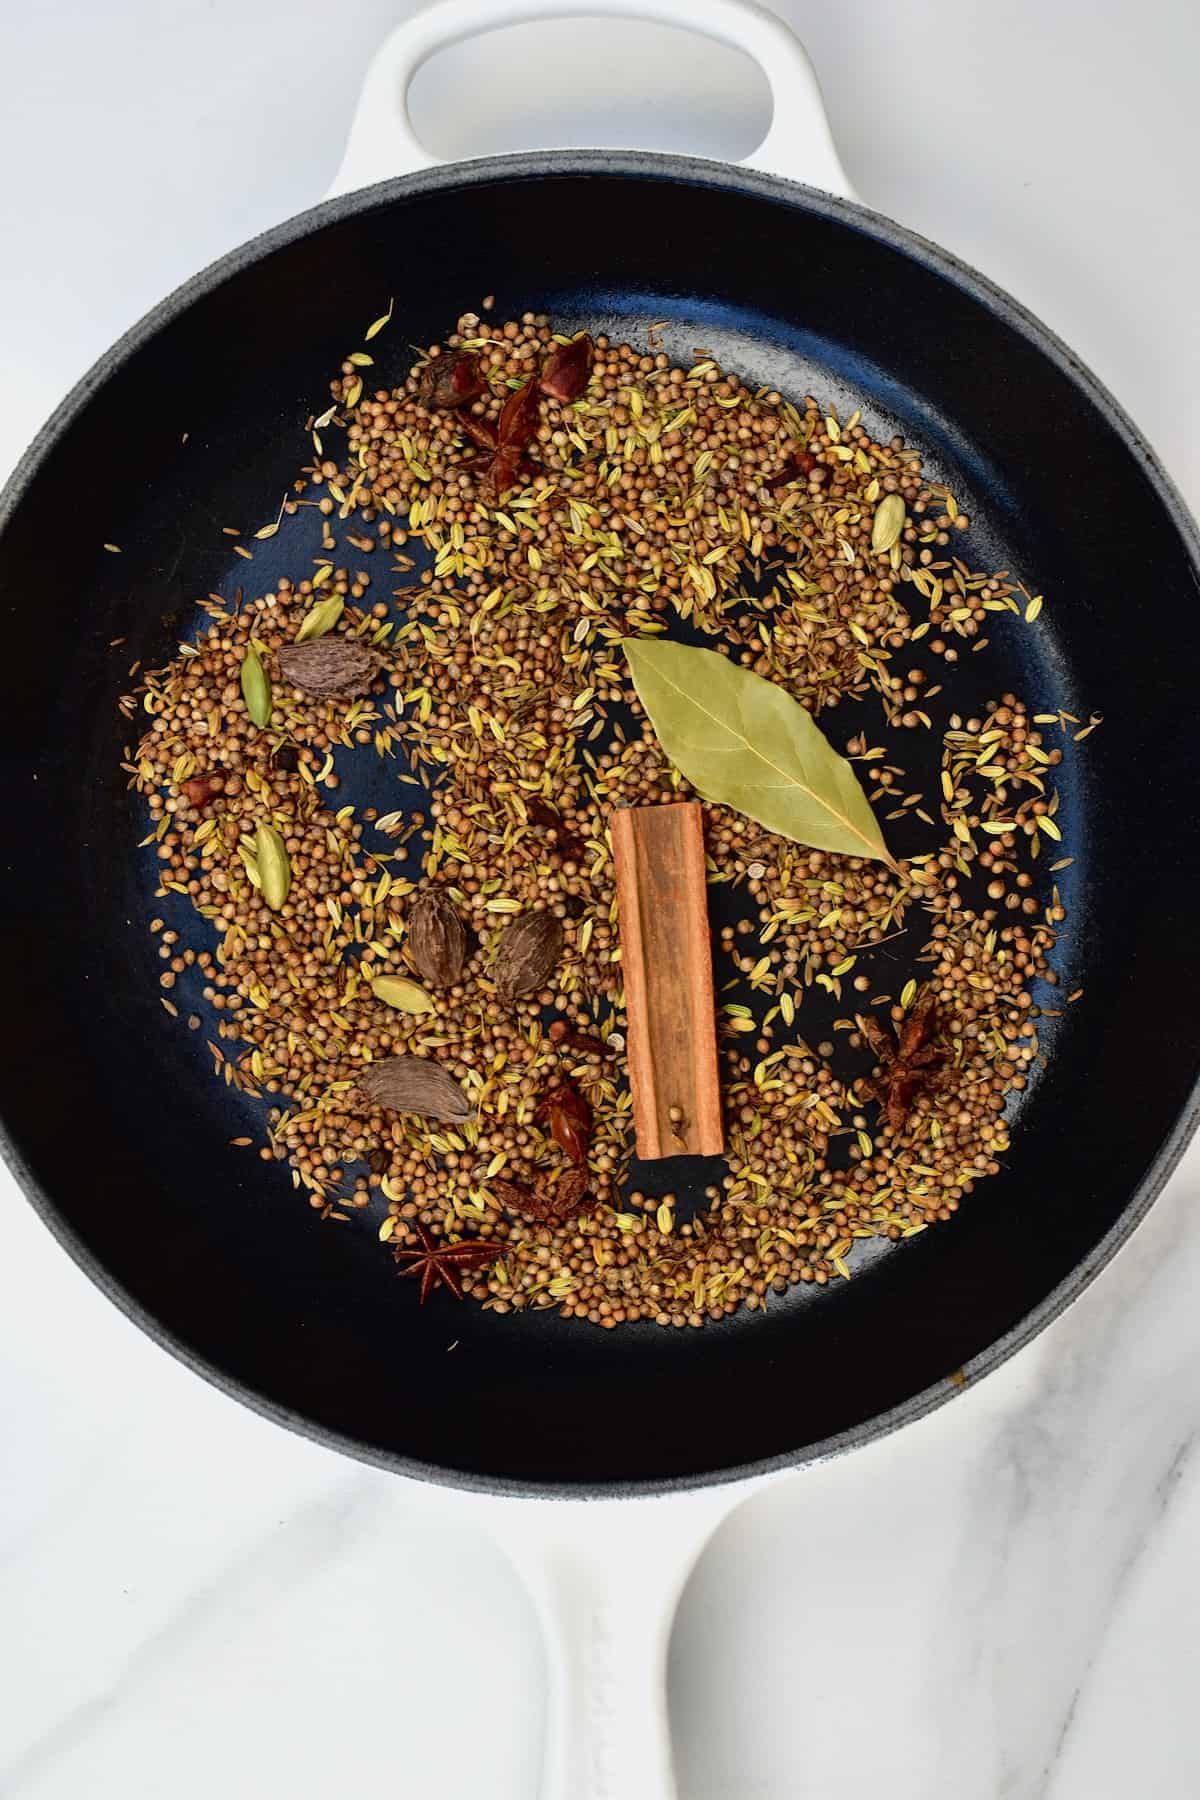 Toasting spices in a pan